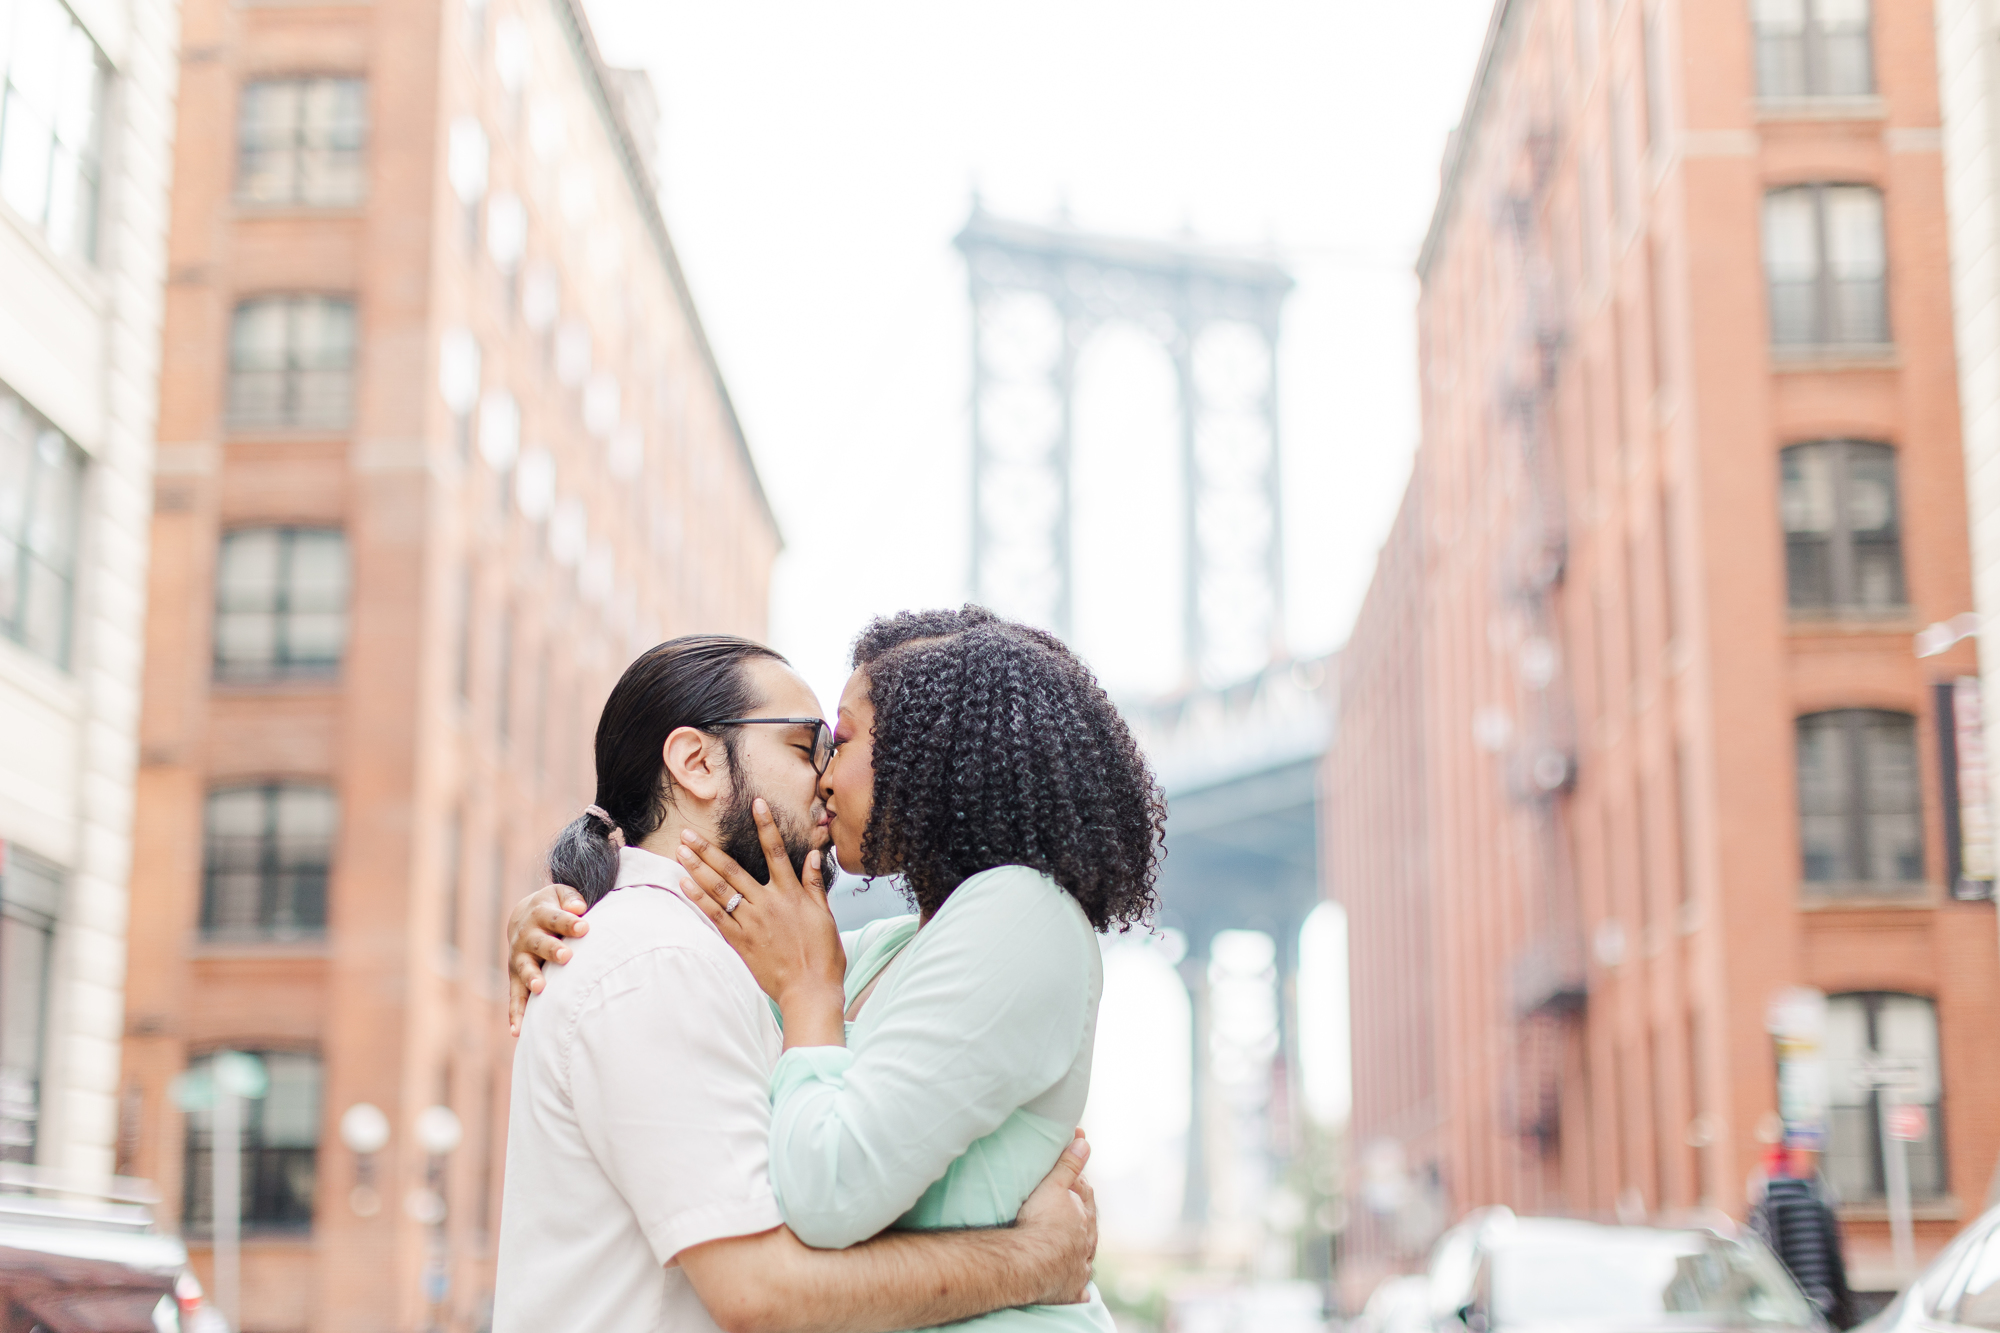 Pretty Summer Engagement Photo Shoot in New York